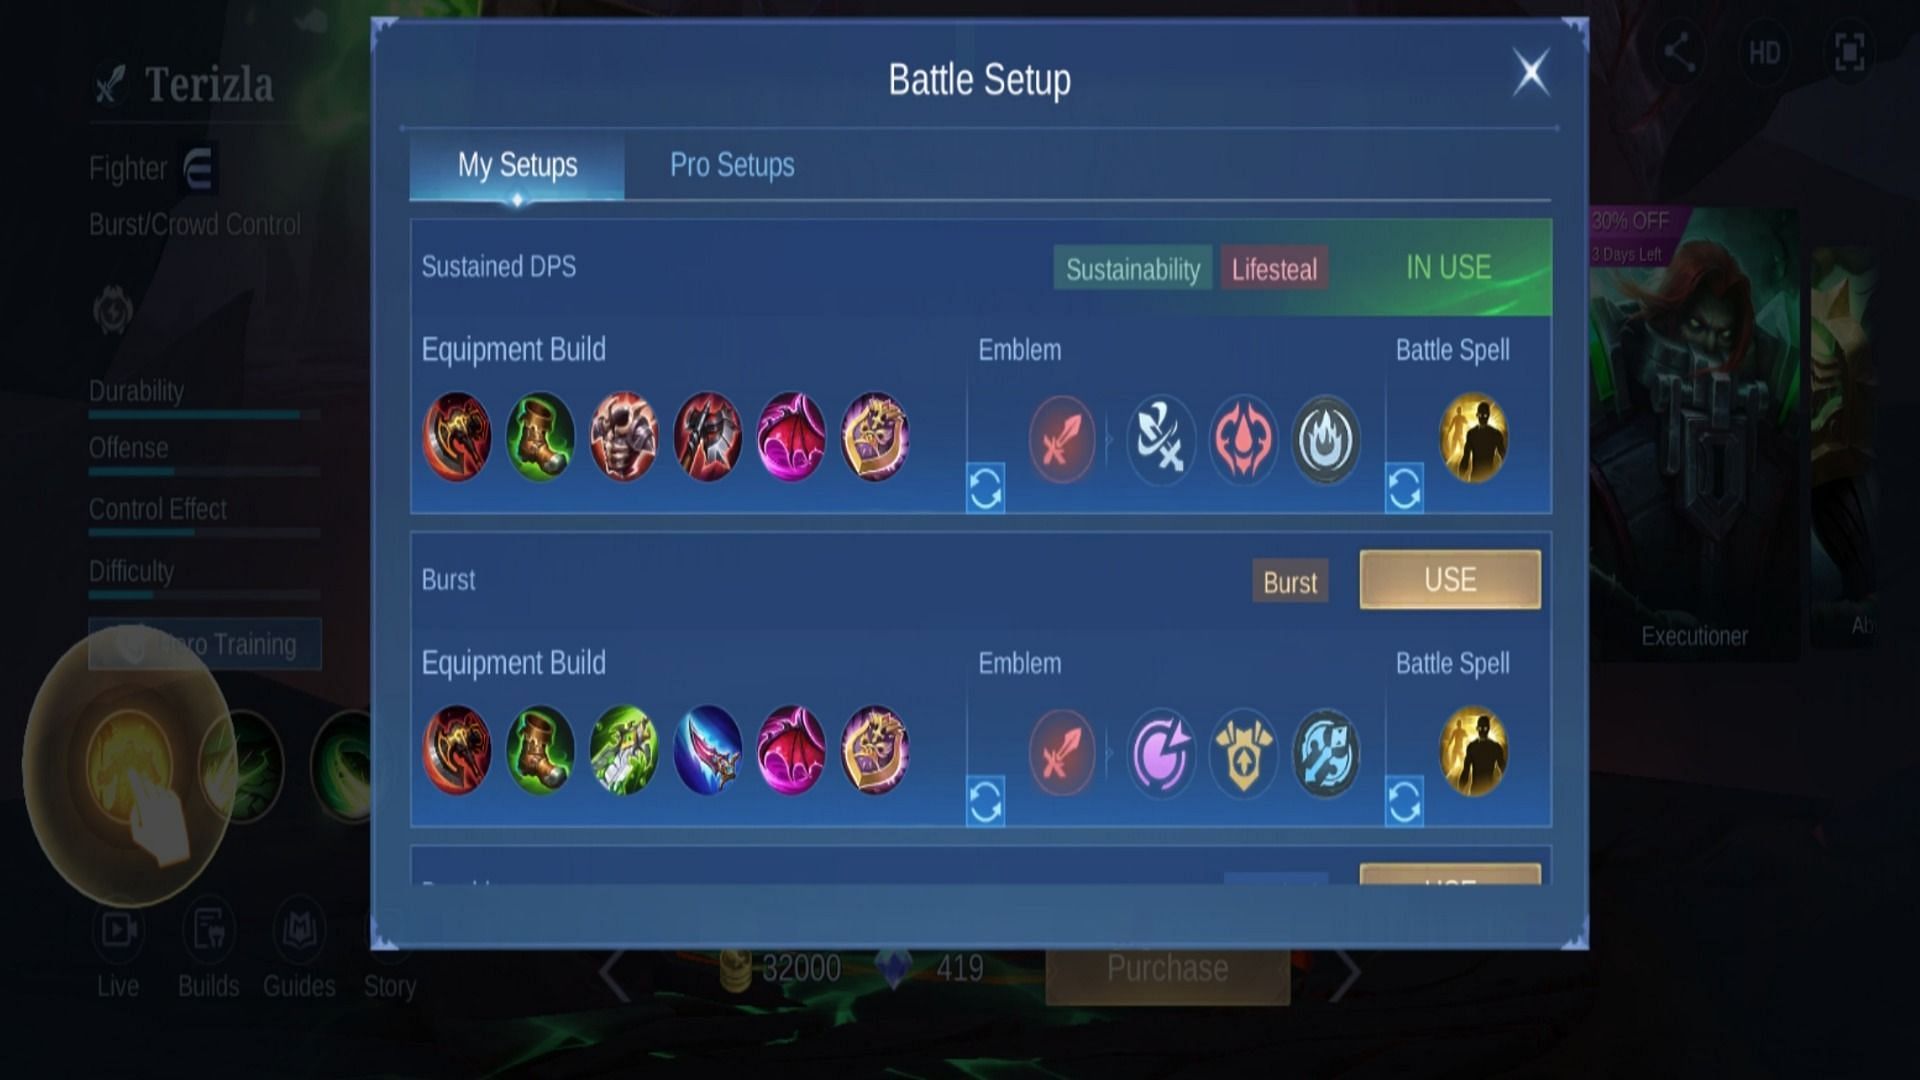 You can follow the preset builds that MLBB provides or customize your build as per your preferences (Image via Moonton Games)